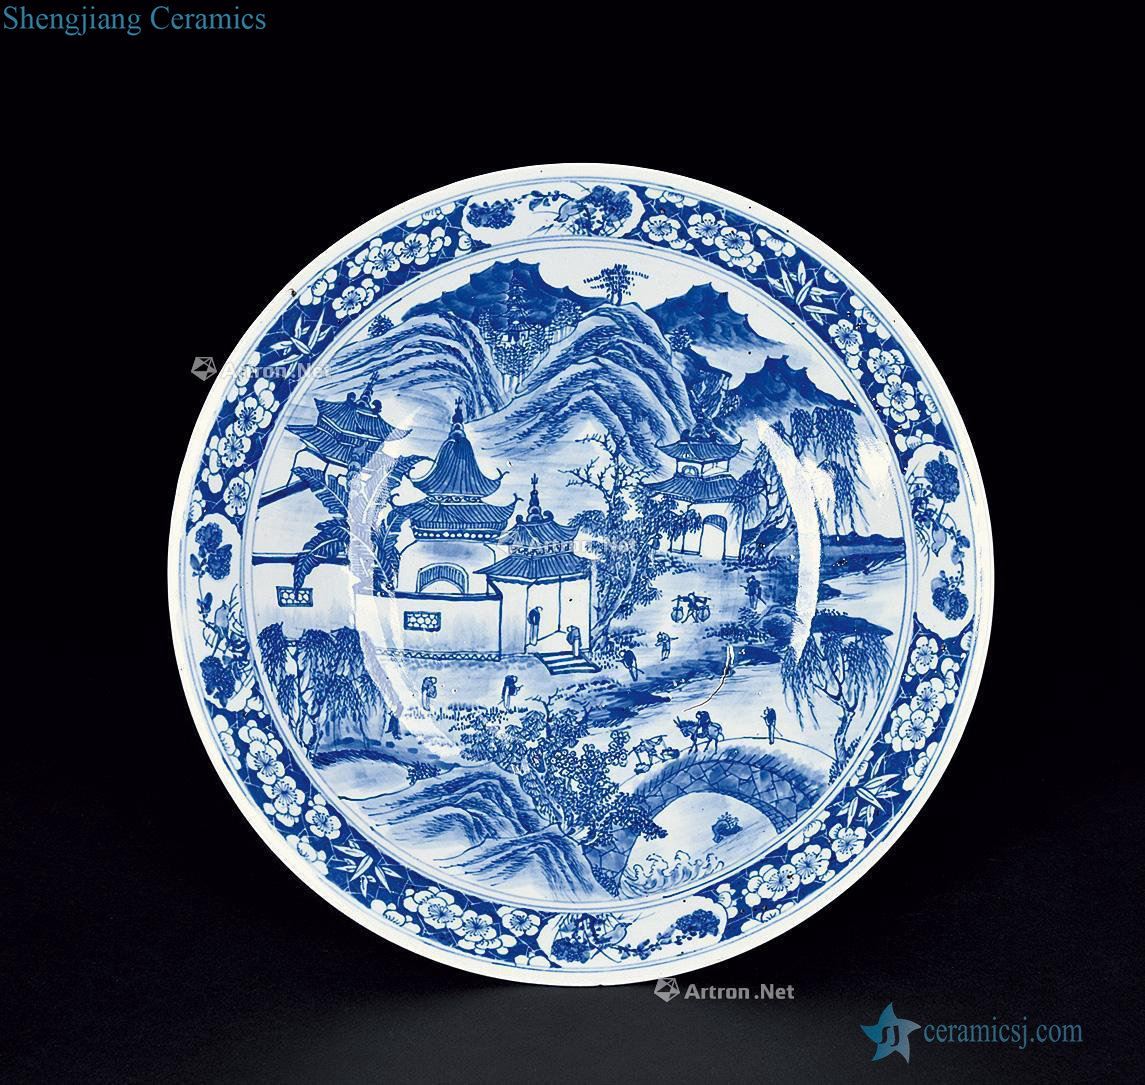 Qing xianfeng Blue and white landscape character